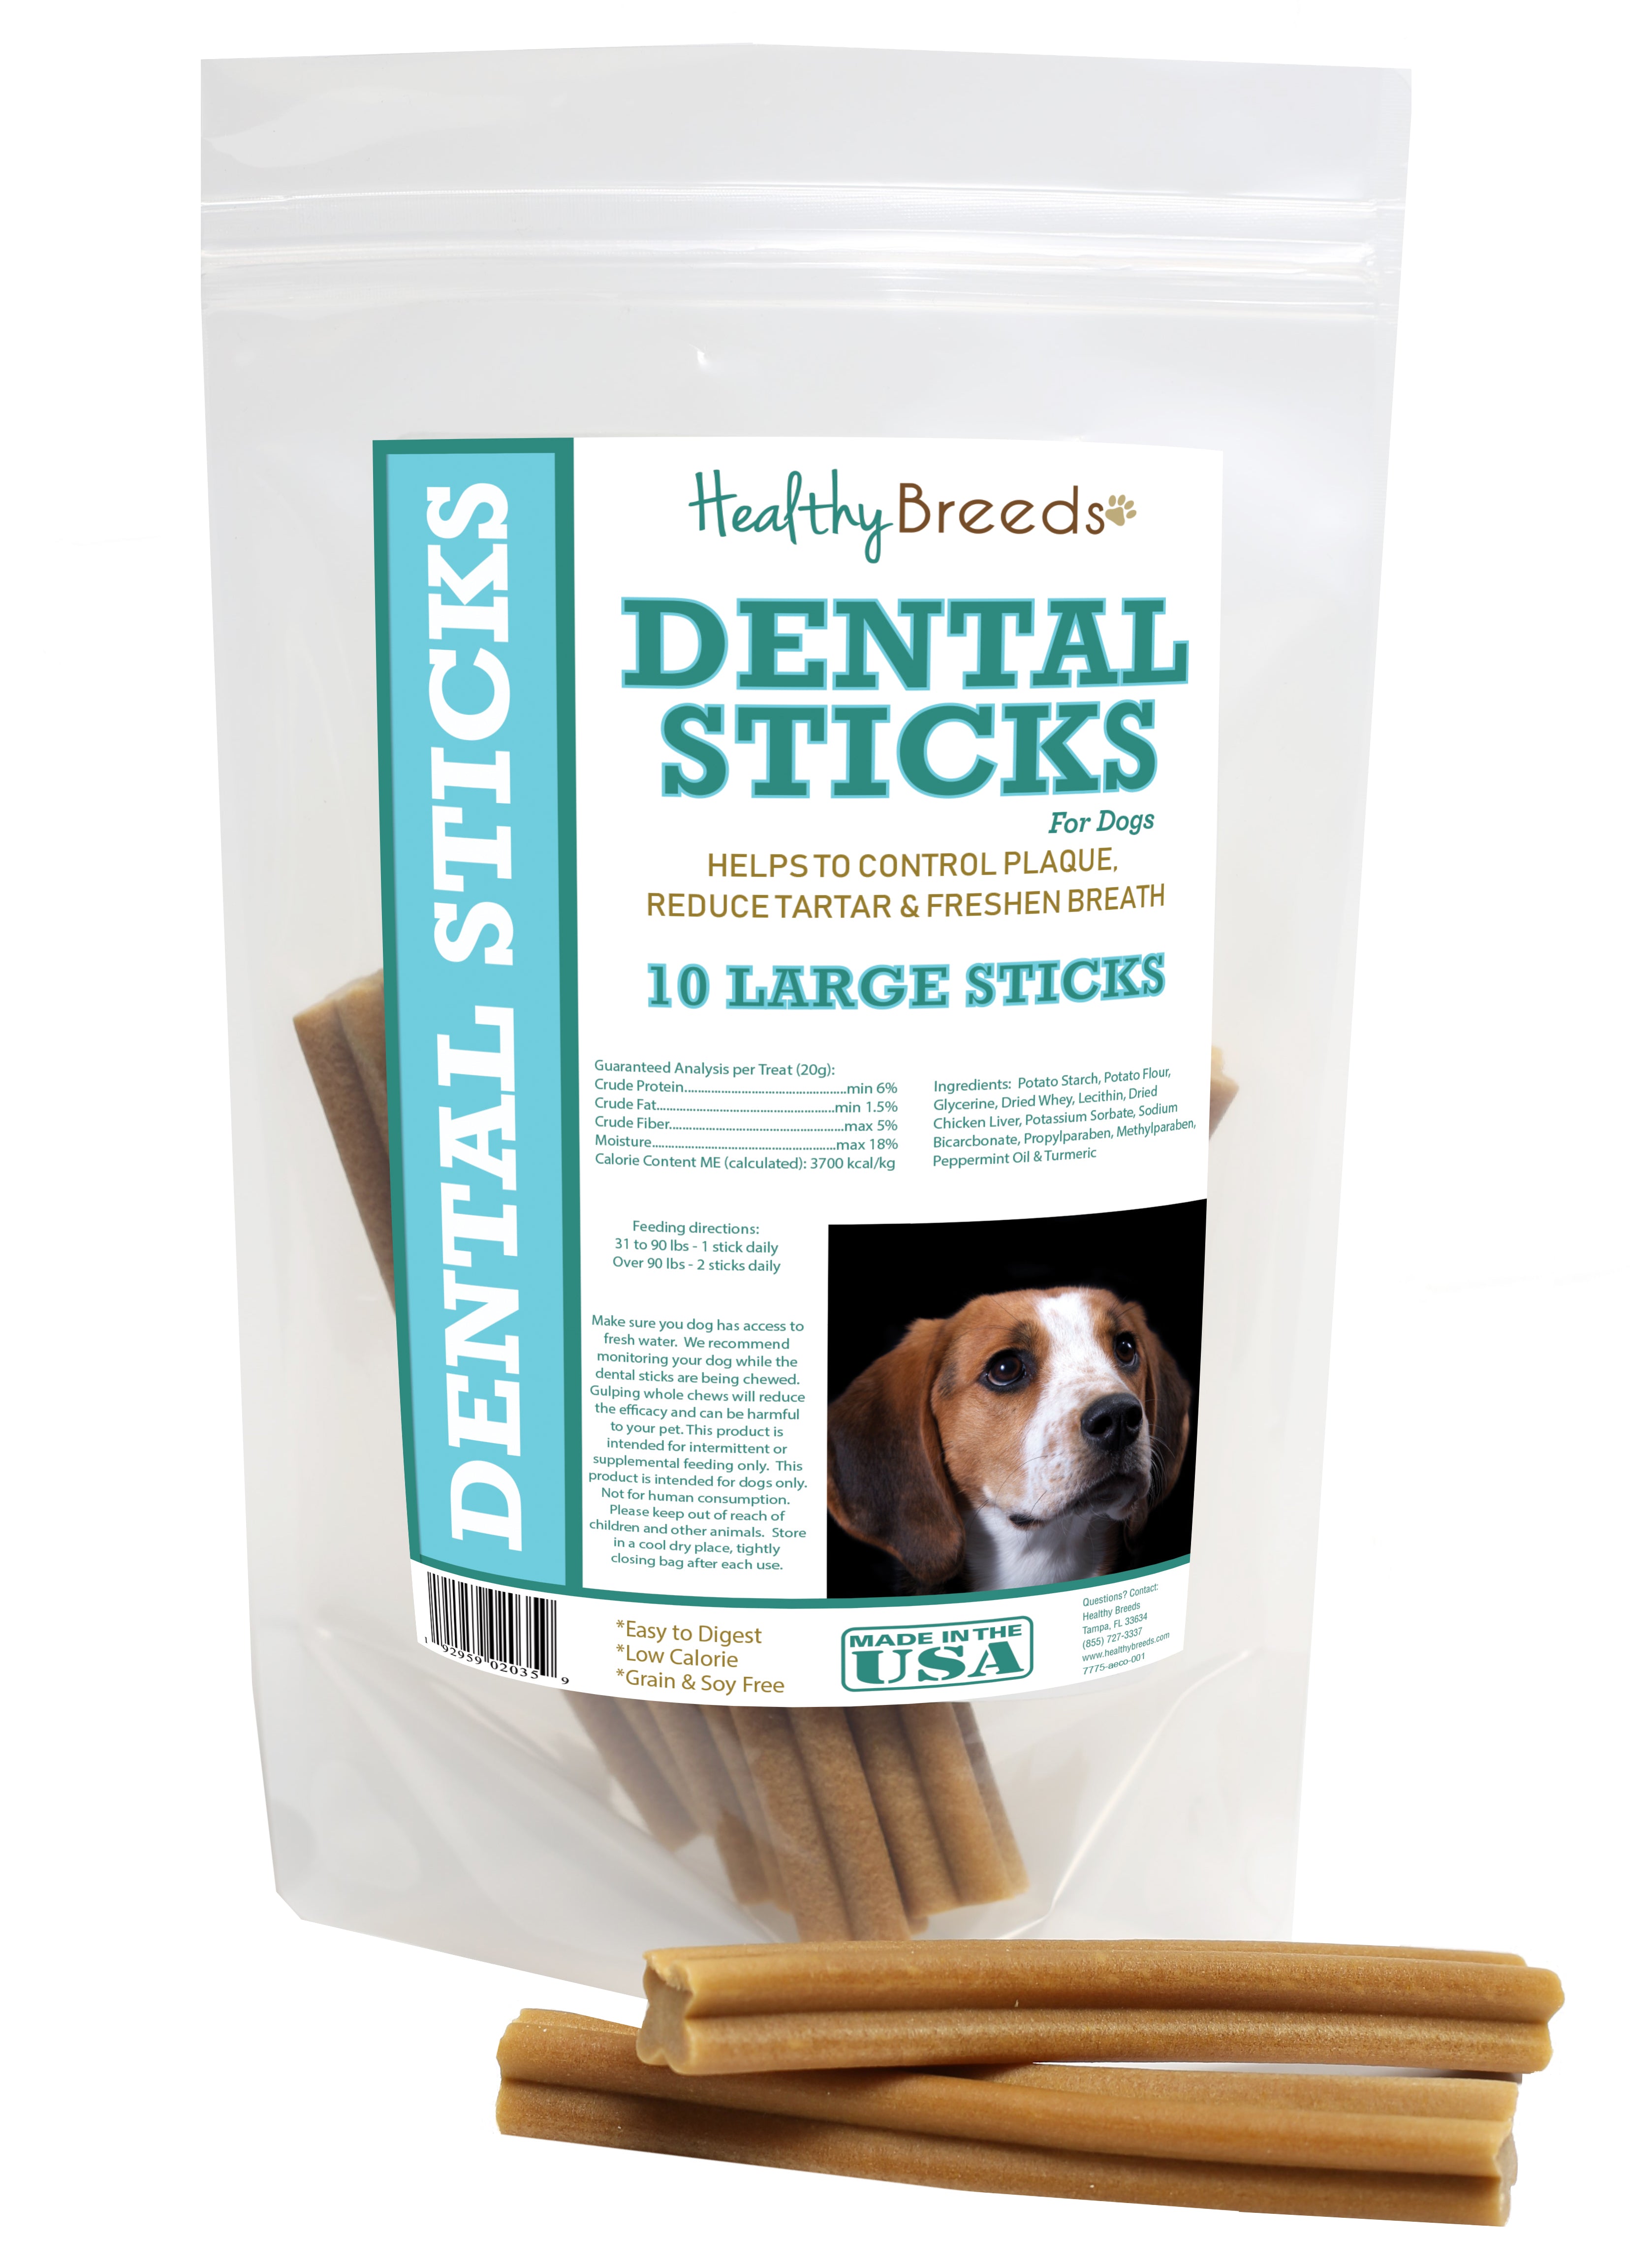 American English Coonhound Dental Sticks Large 10 Count